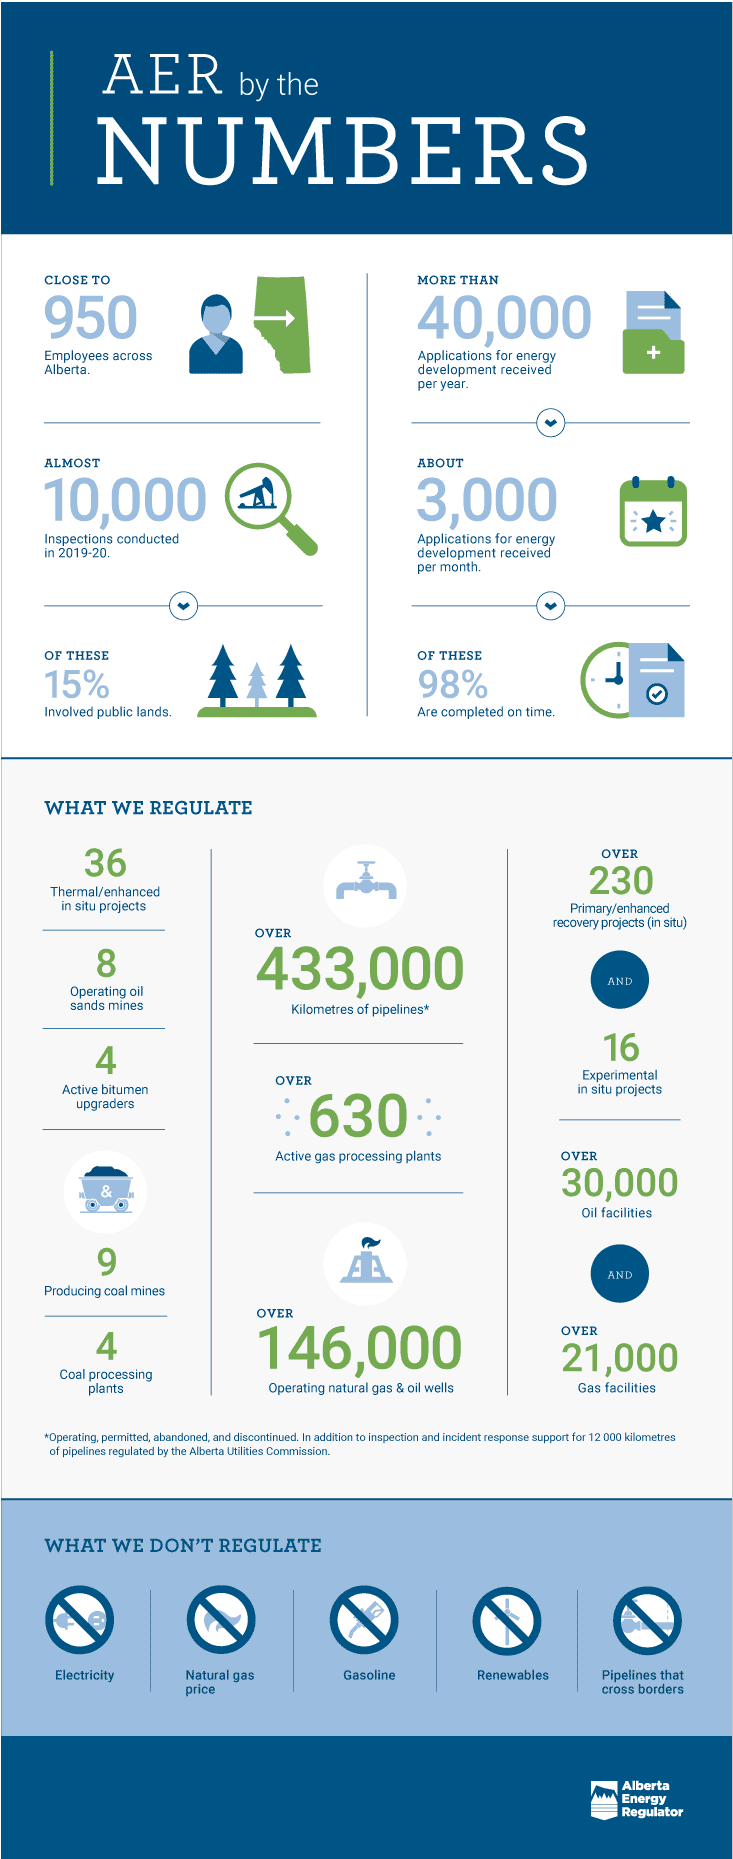 Alberta Energy Regulator by the numbers infographic